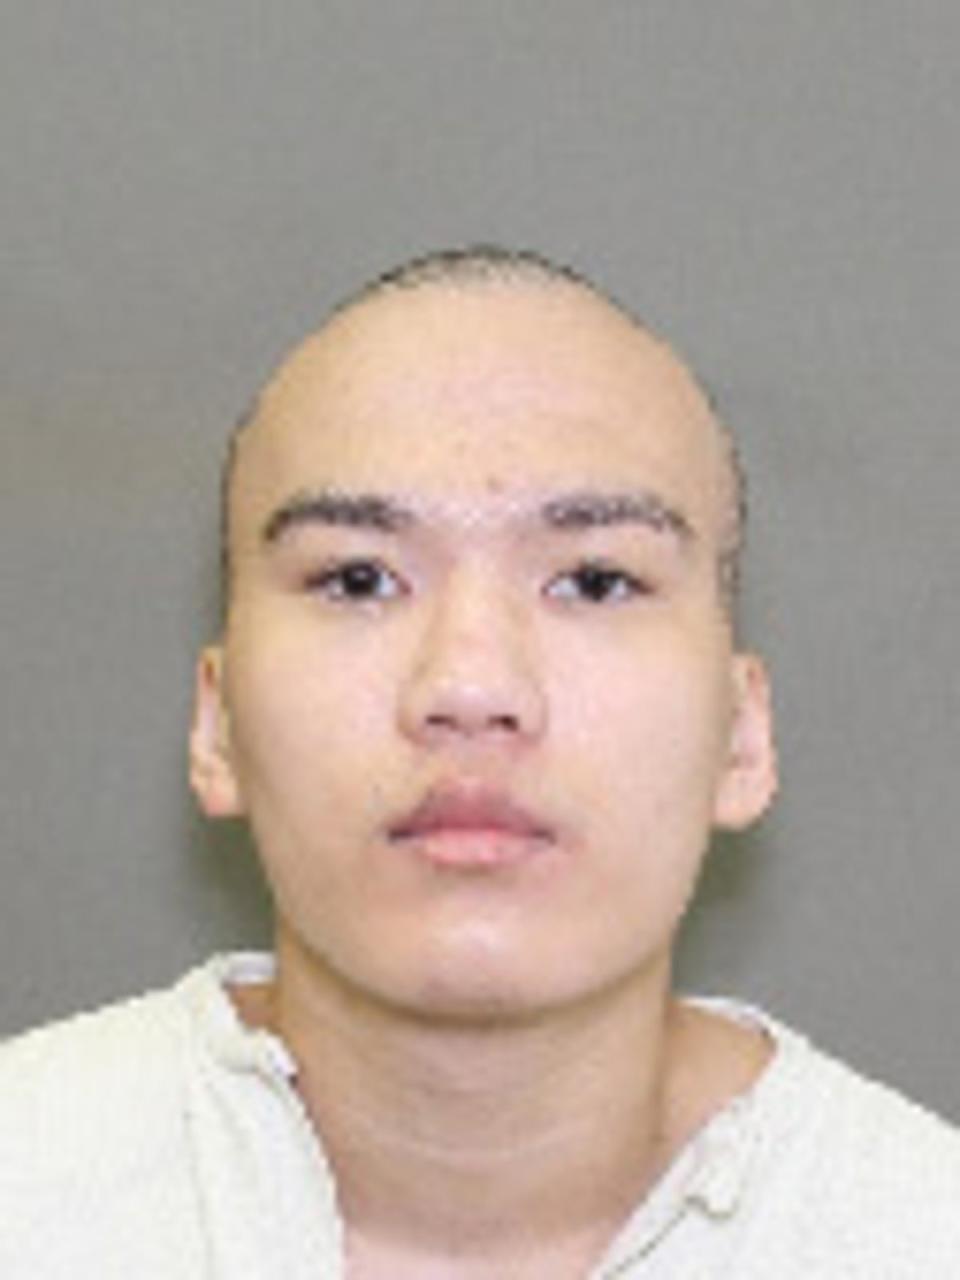 Texas death row inmate Gabriel Paul Hall (Texas Department of Criminal Justice)